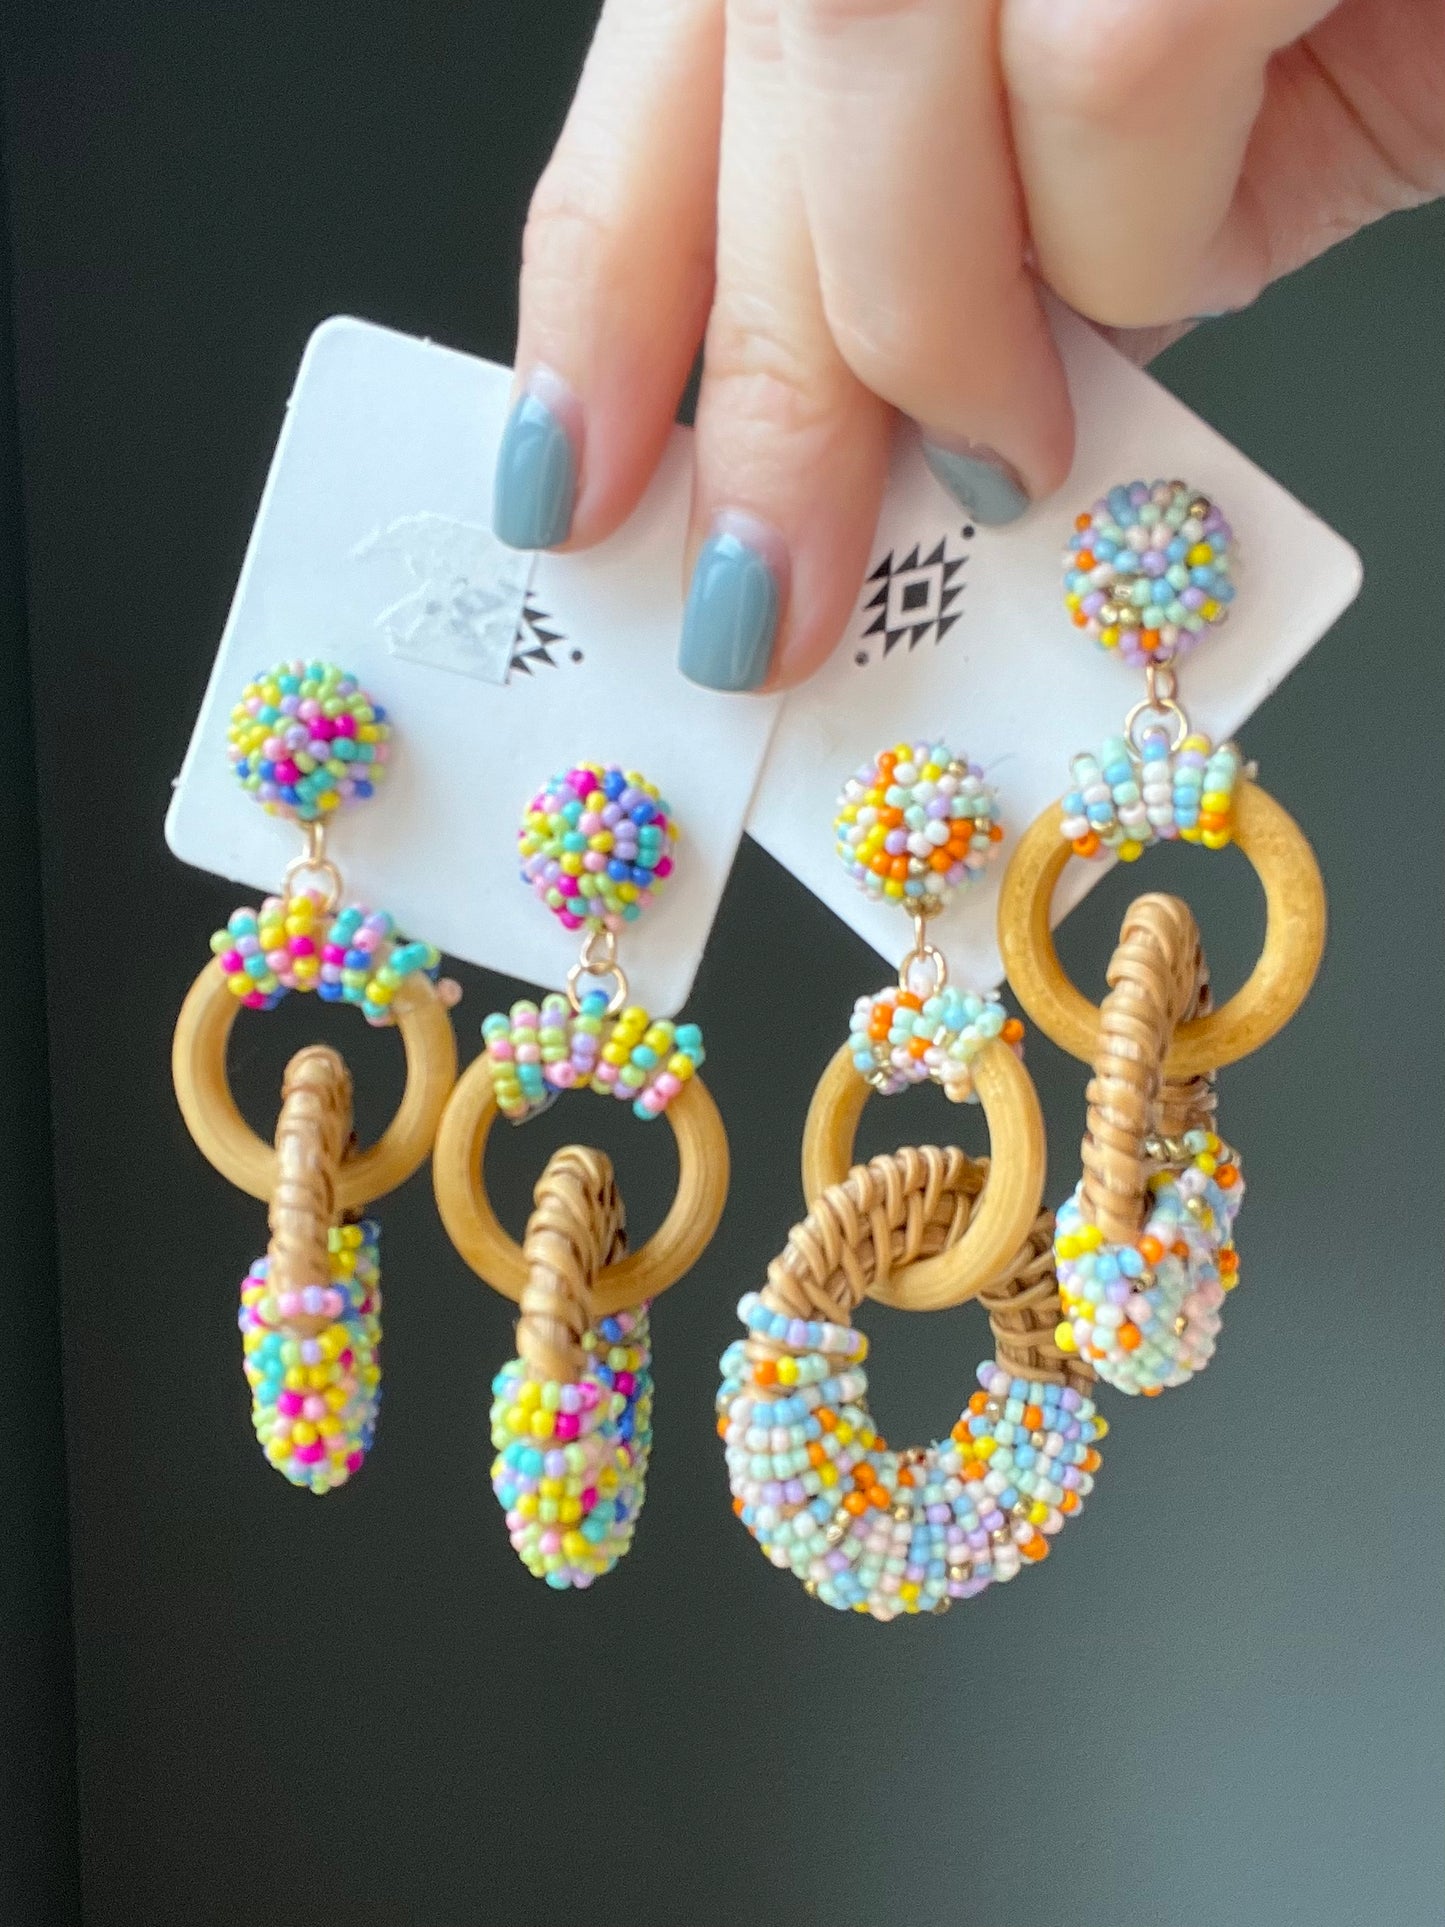 Life of the party earrings